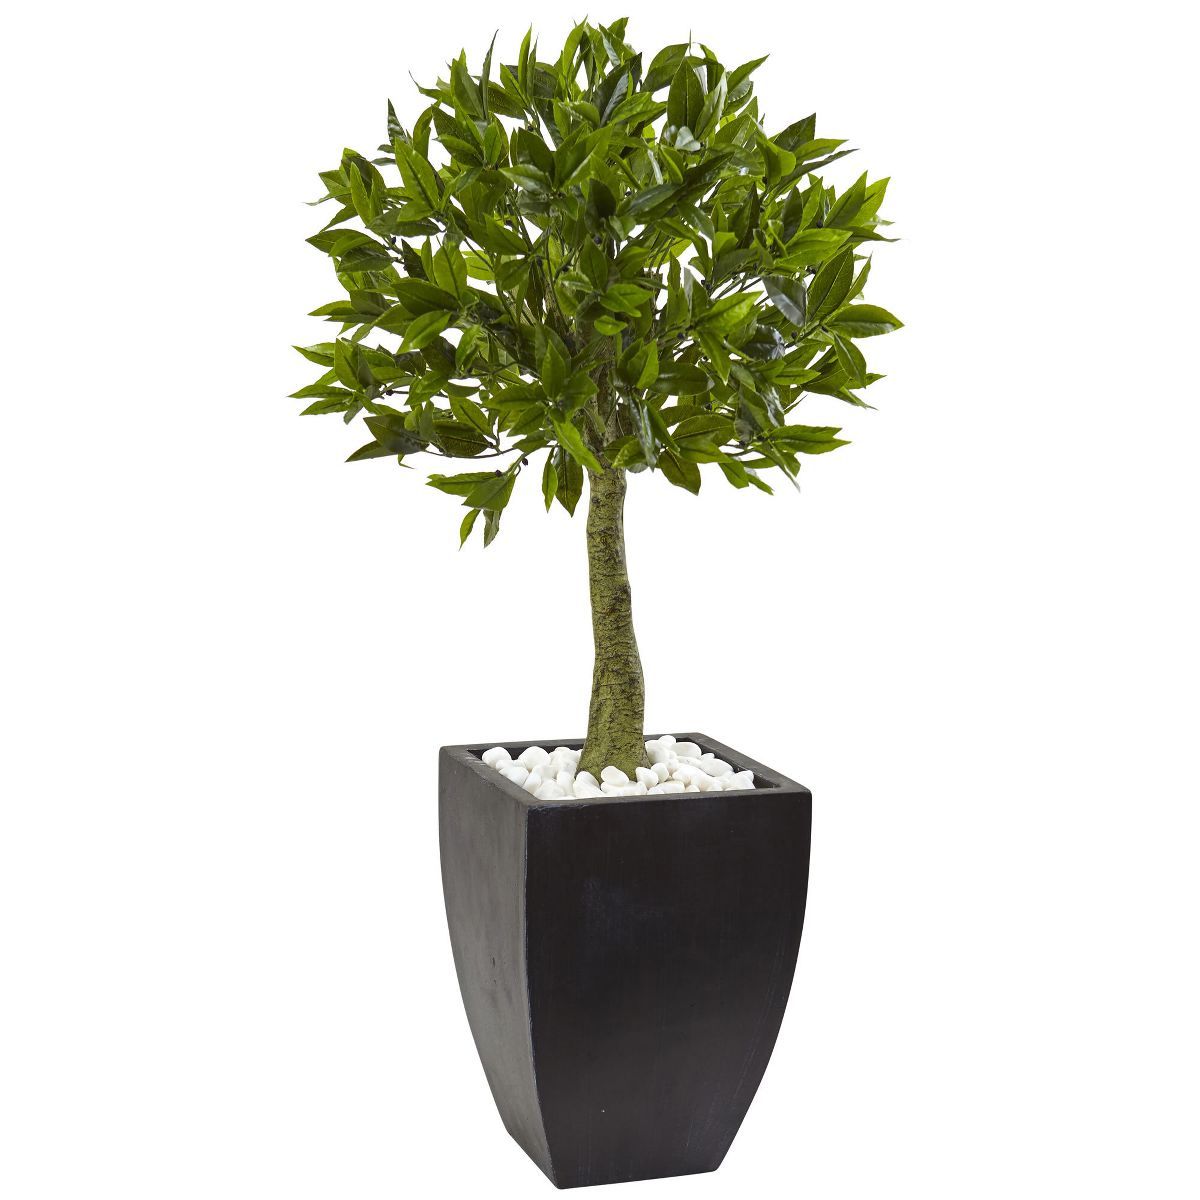 42" Bay Leaf Topiary with Black Wash Planter UV Resistant (Indoor/Outdoor) - Nearly Natural | Target